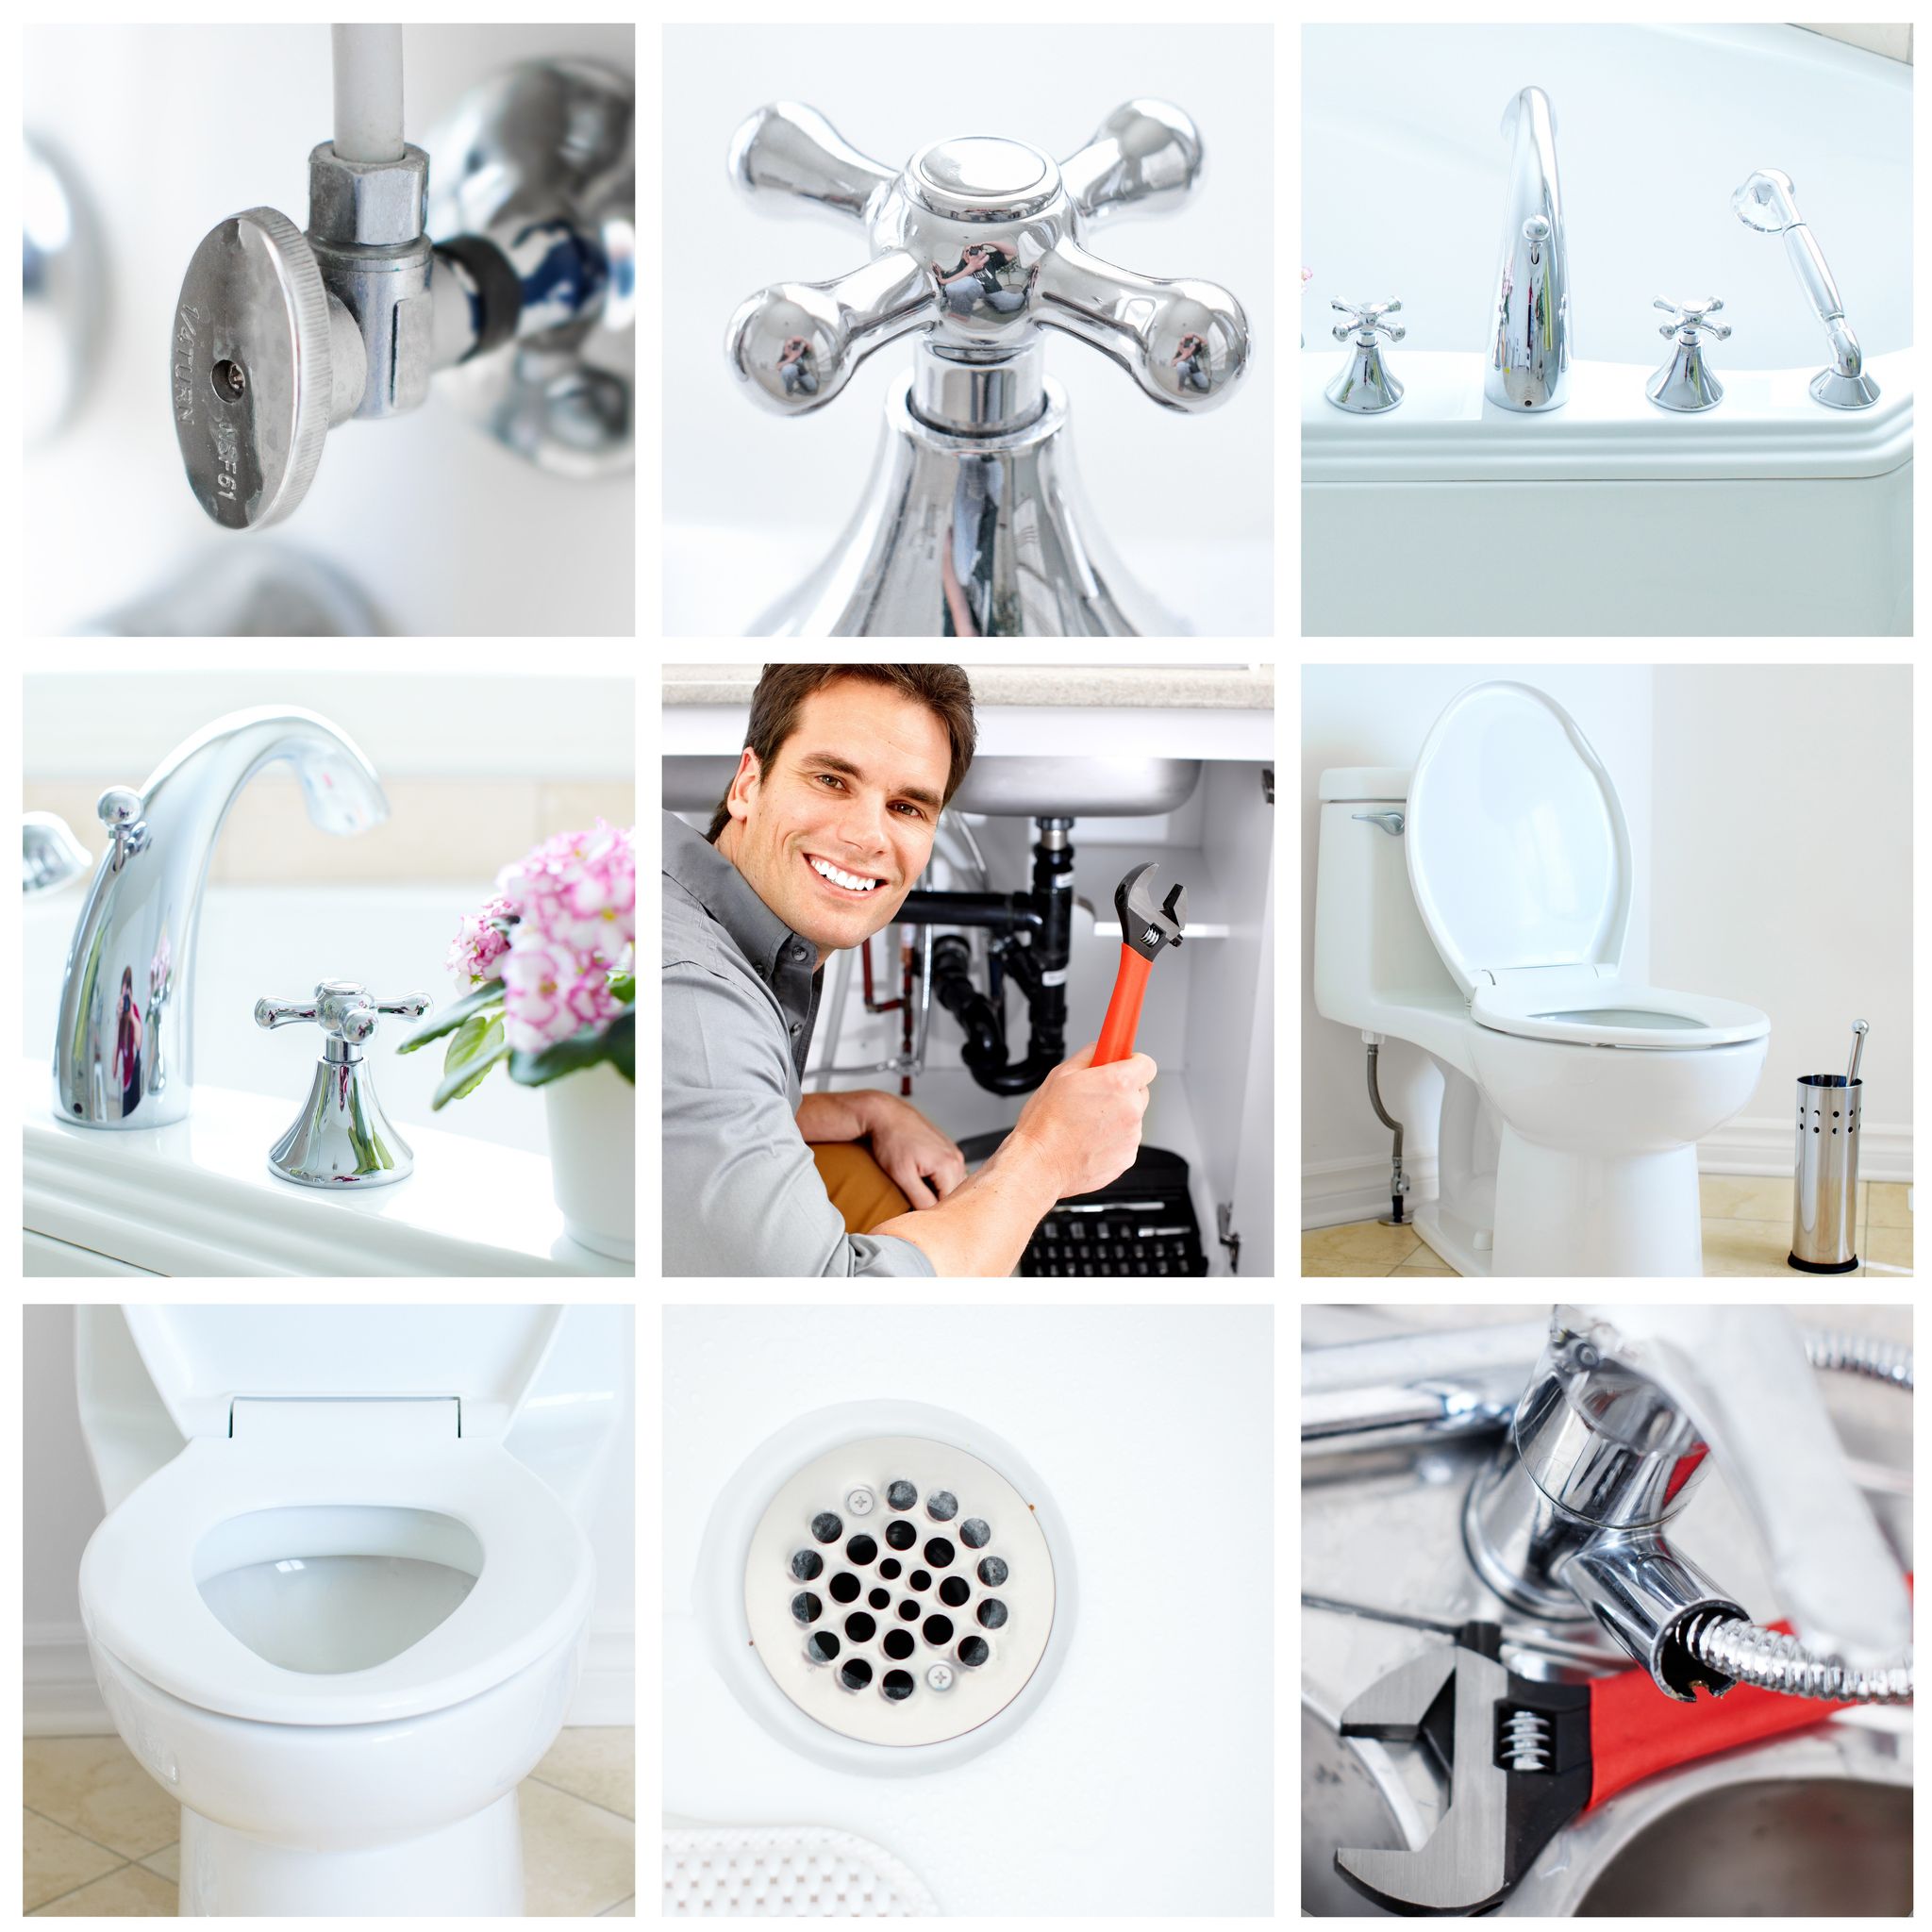 Tips on Finding the Right Plumbing Fixtures for Retail Locations in Kansas City